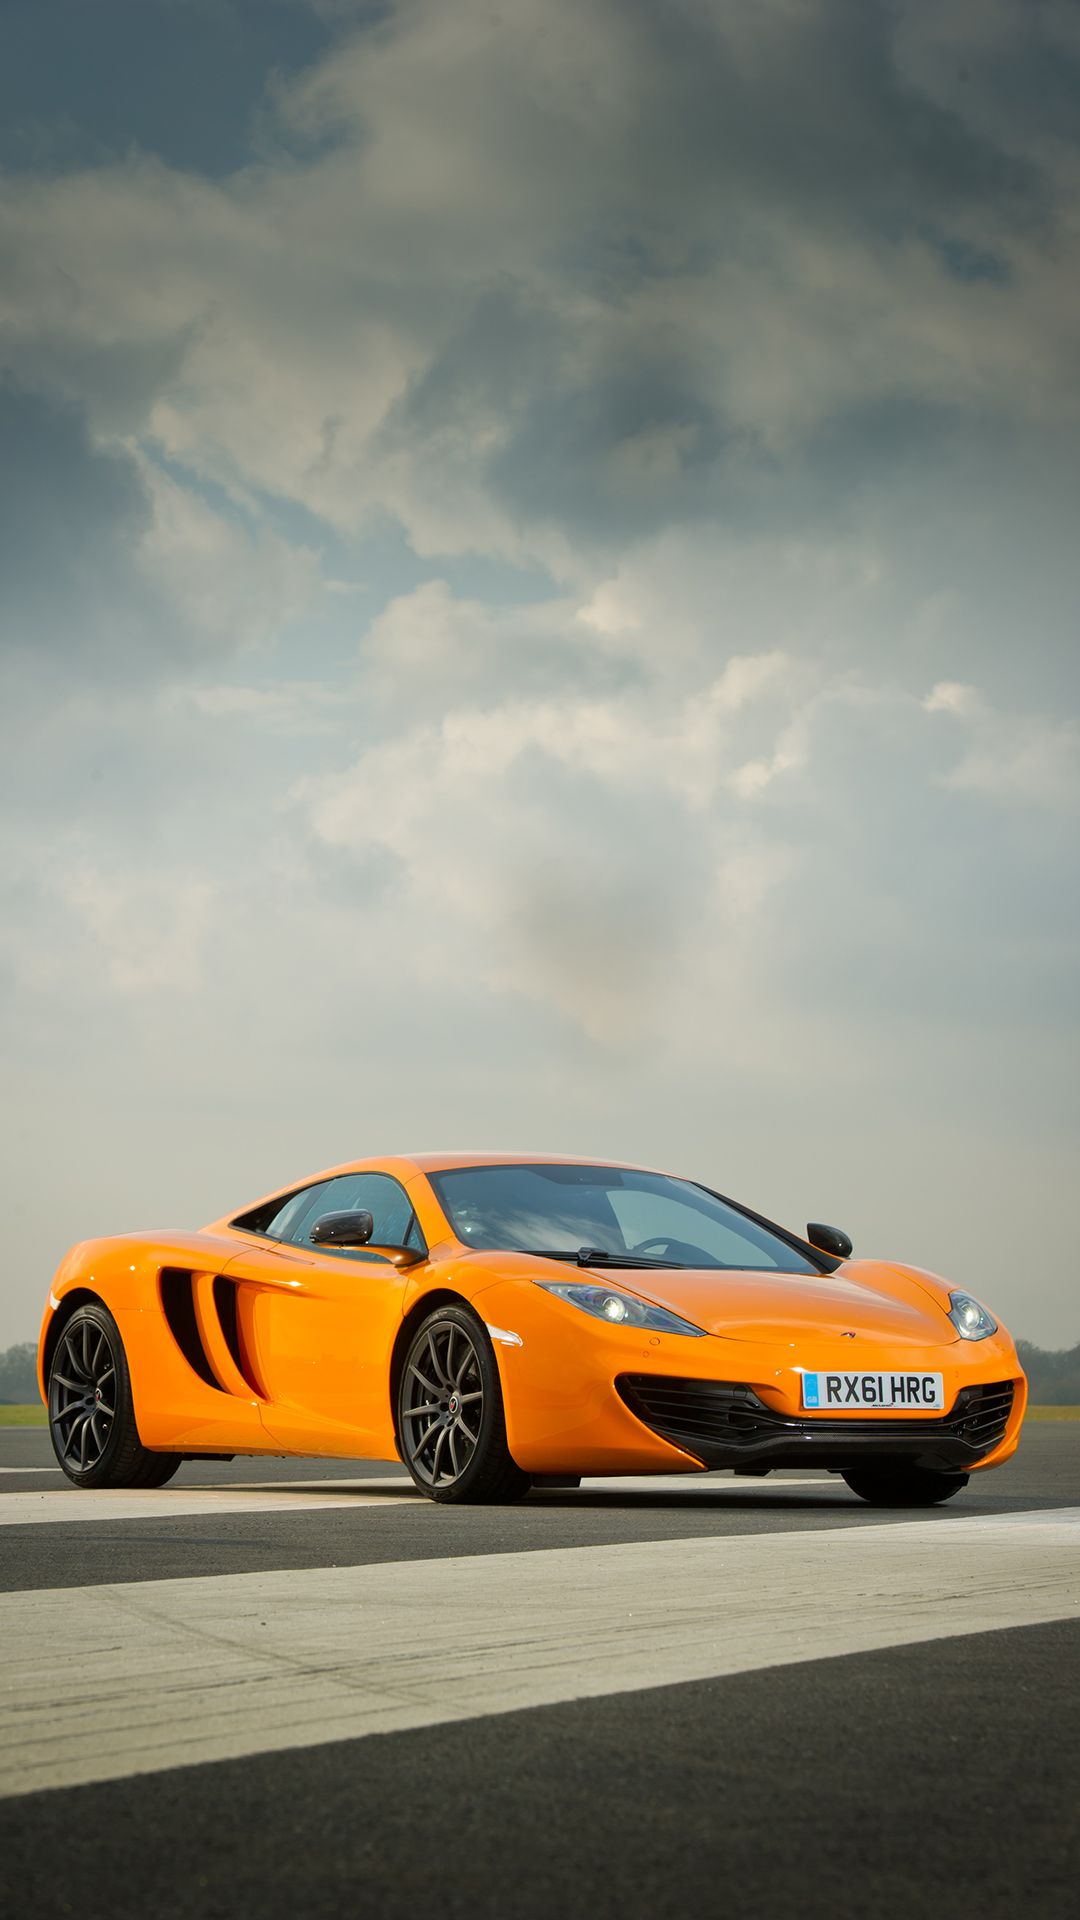 McLaren htc one wallpaper, free and easy to download